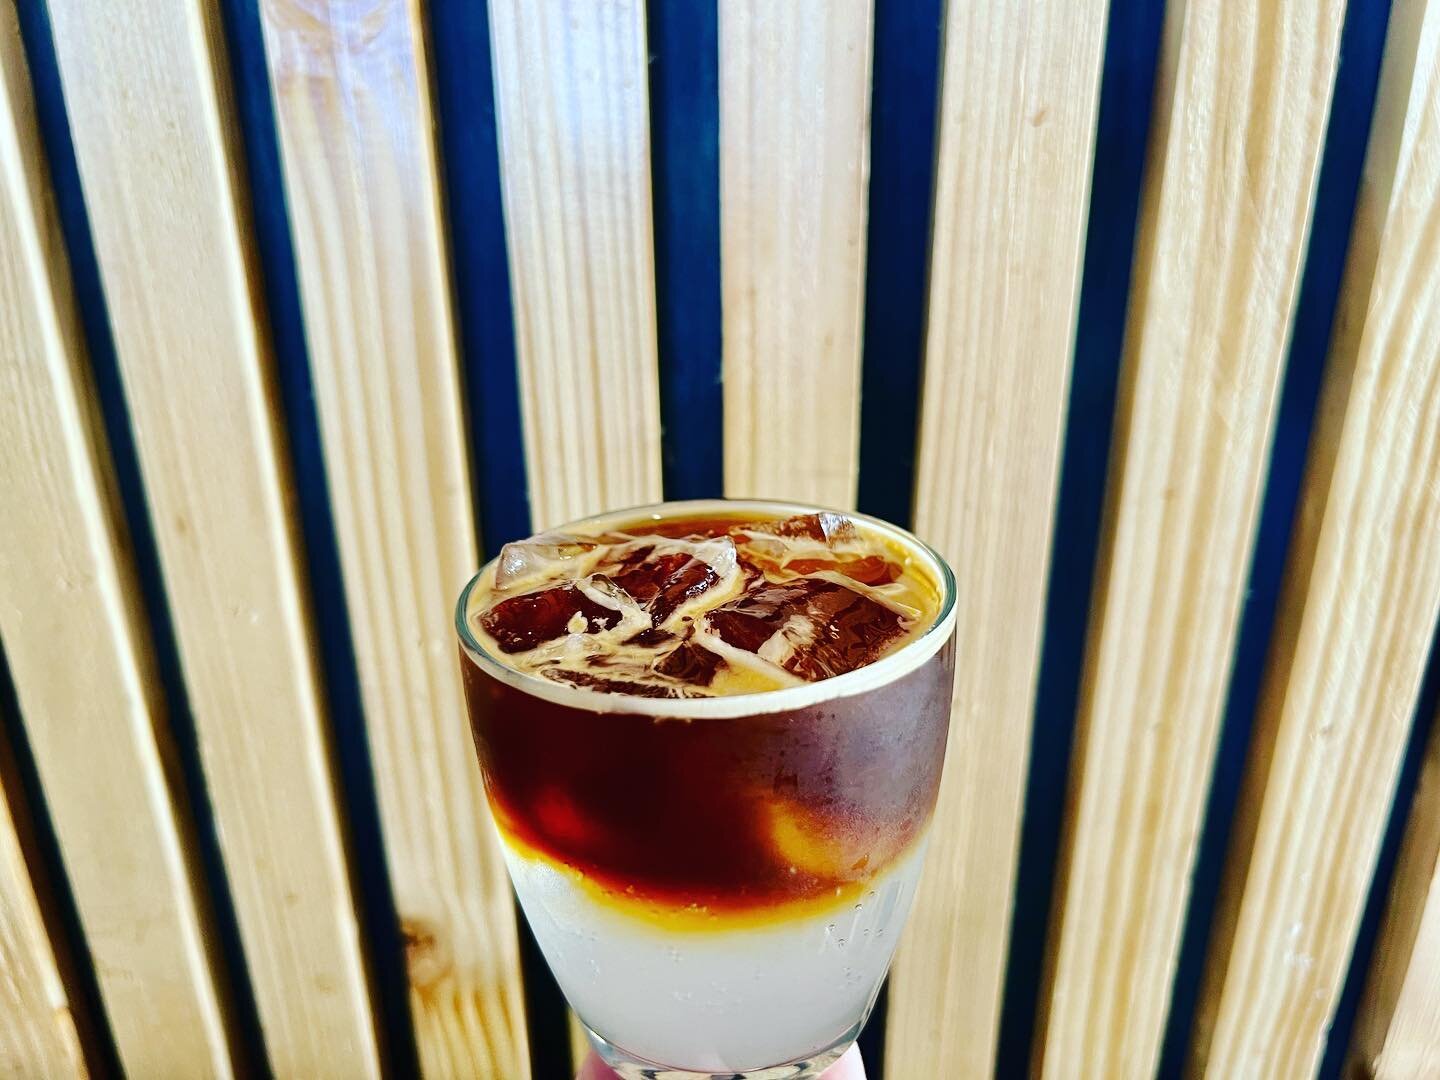 Citrus Tonic Espresso is back for the summertime